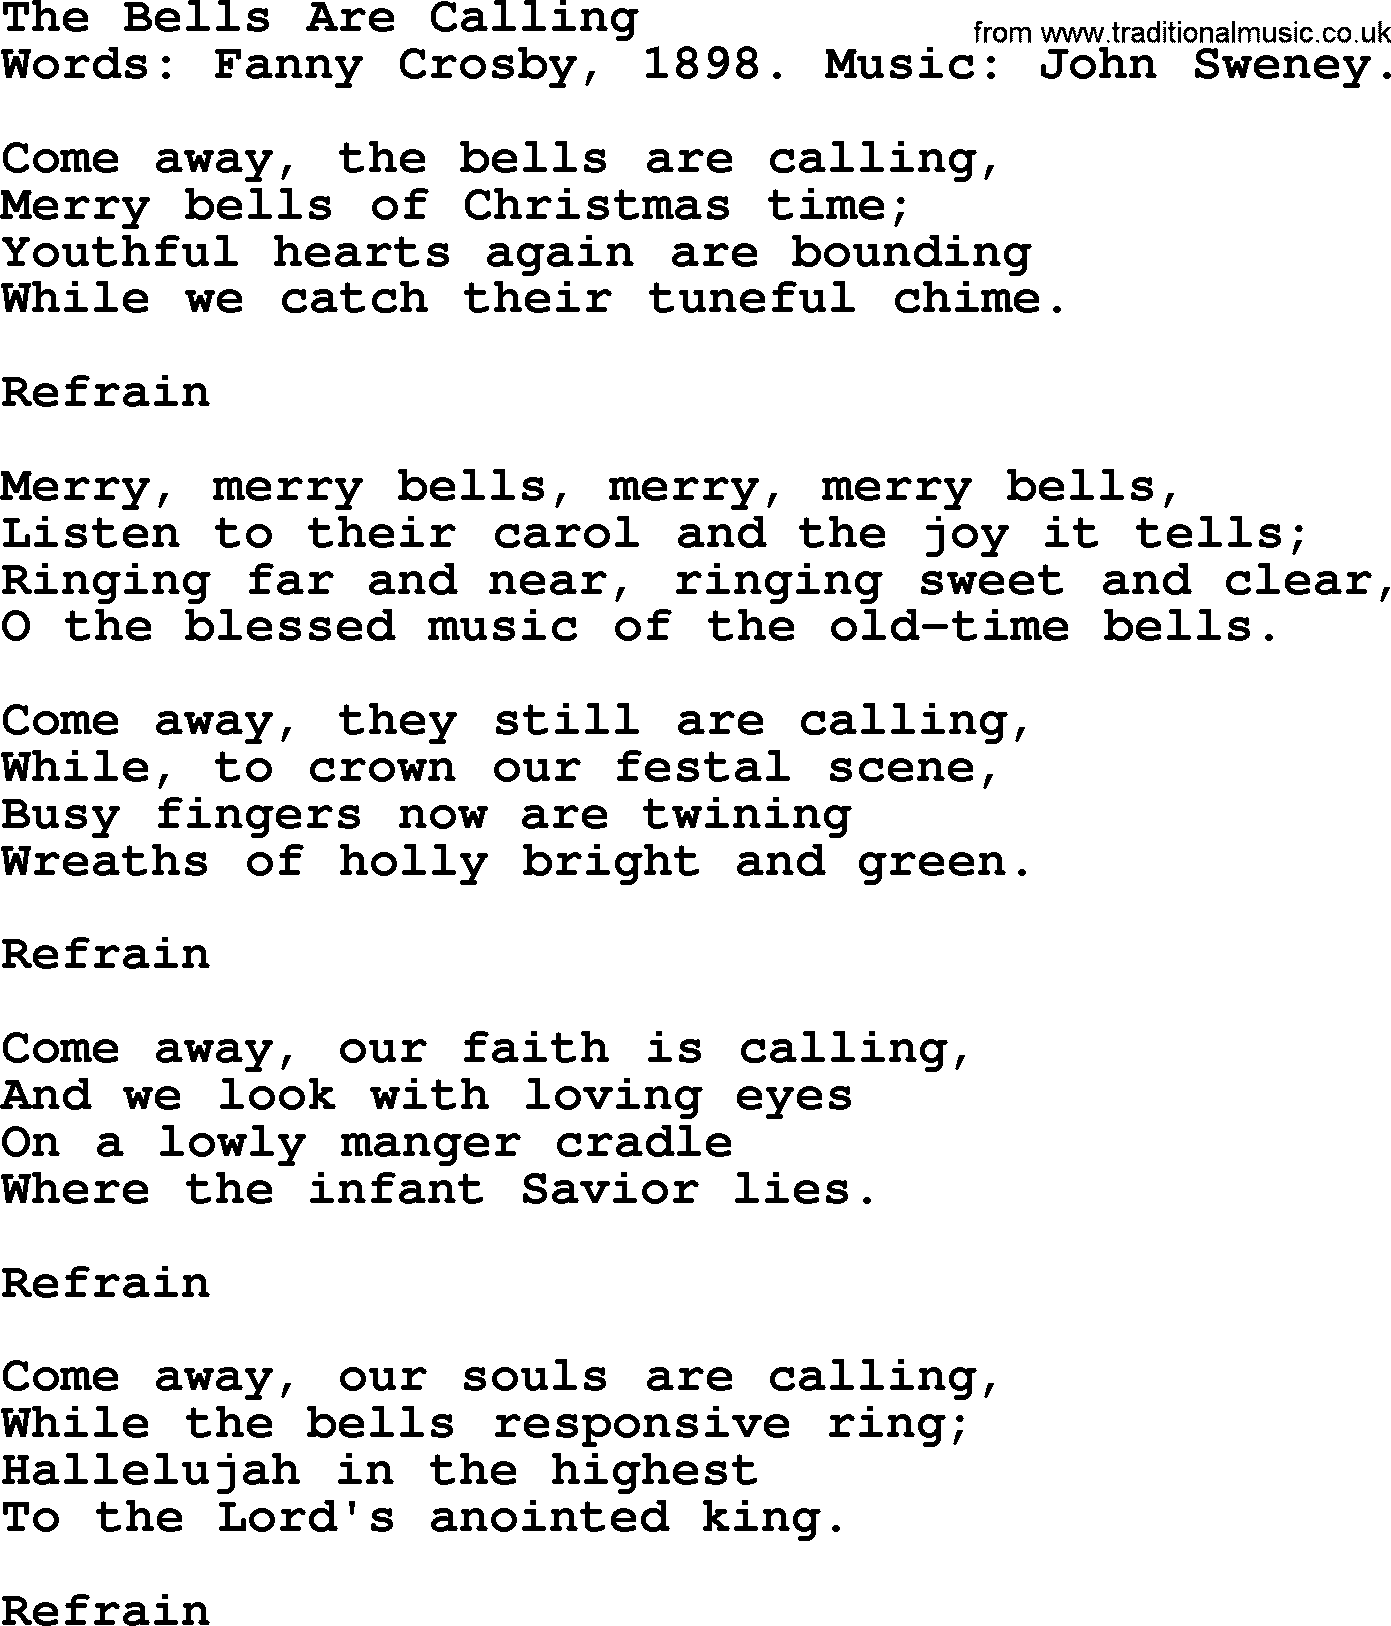 Fanny Crosby song: The Bells Are Calling, lyrics